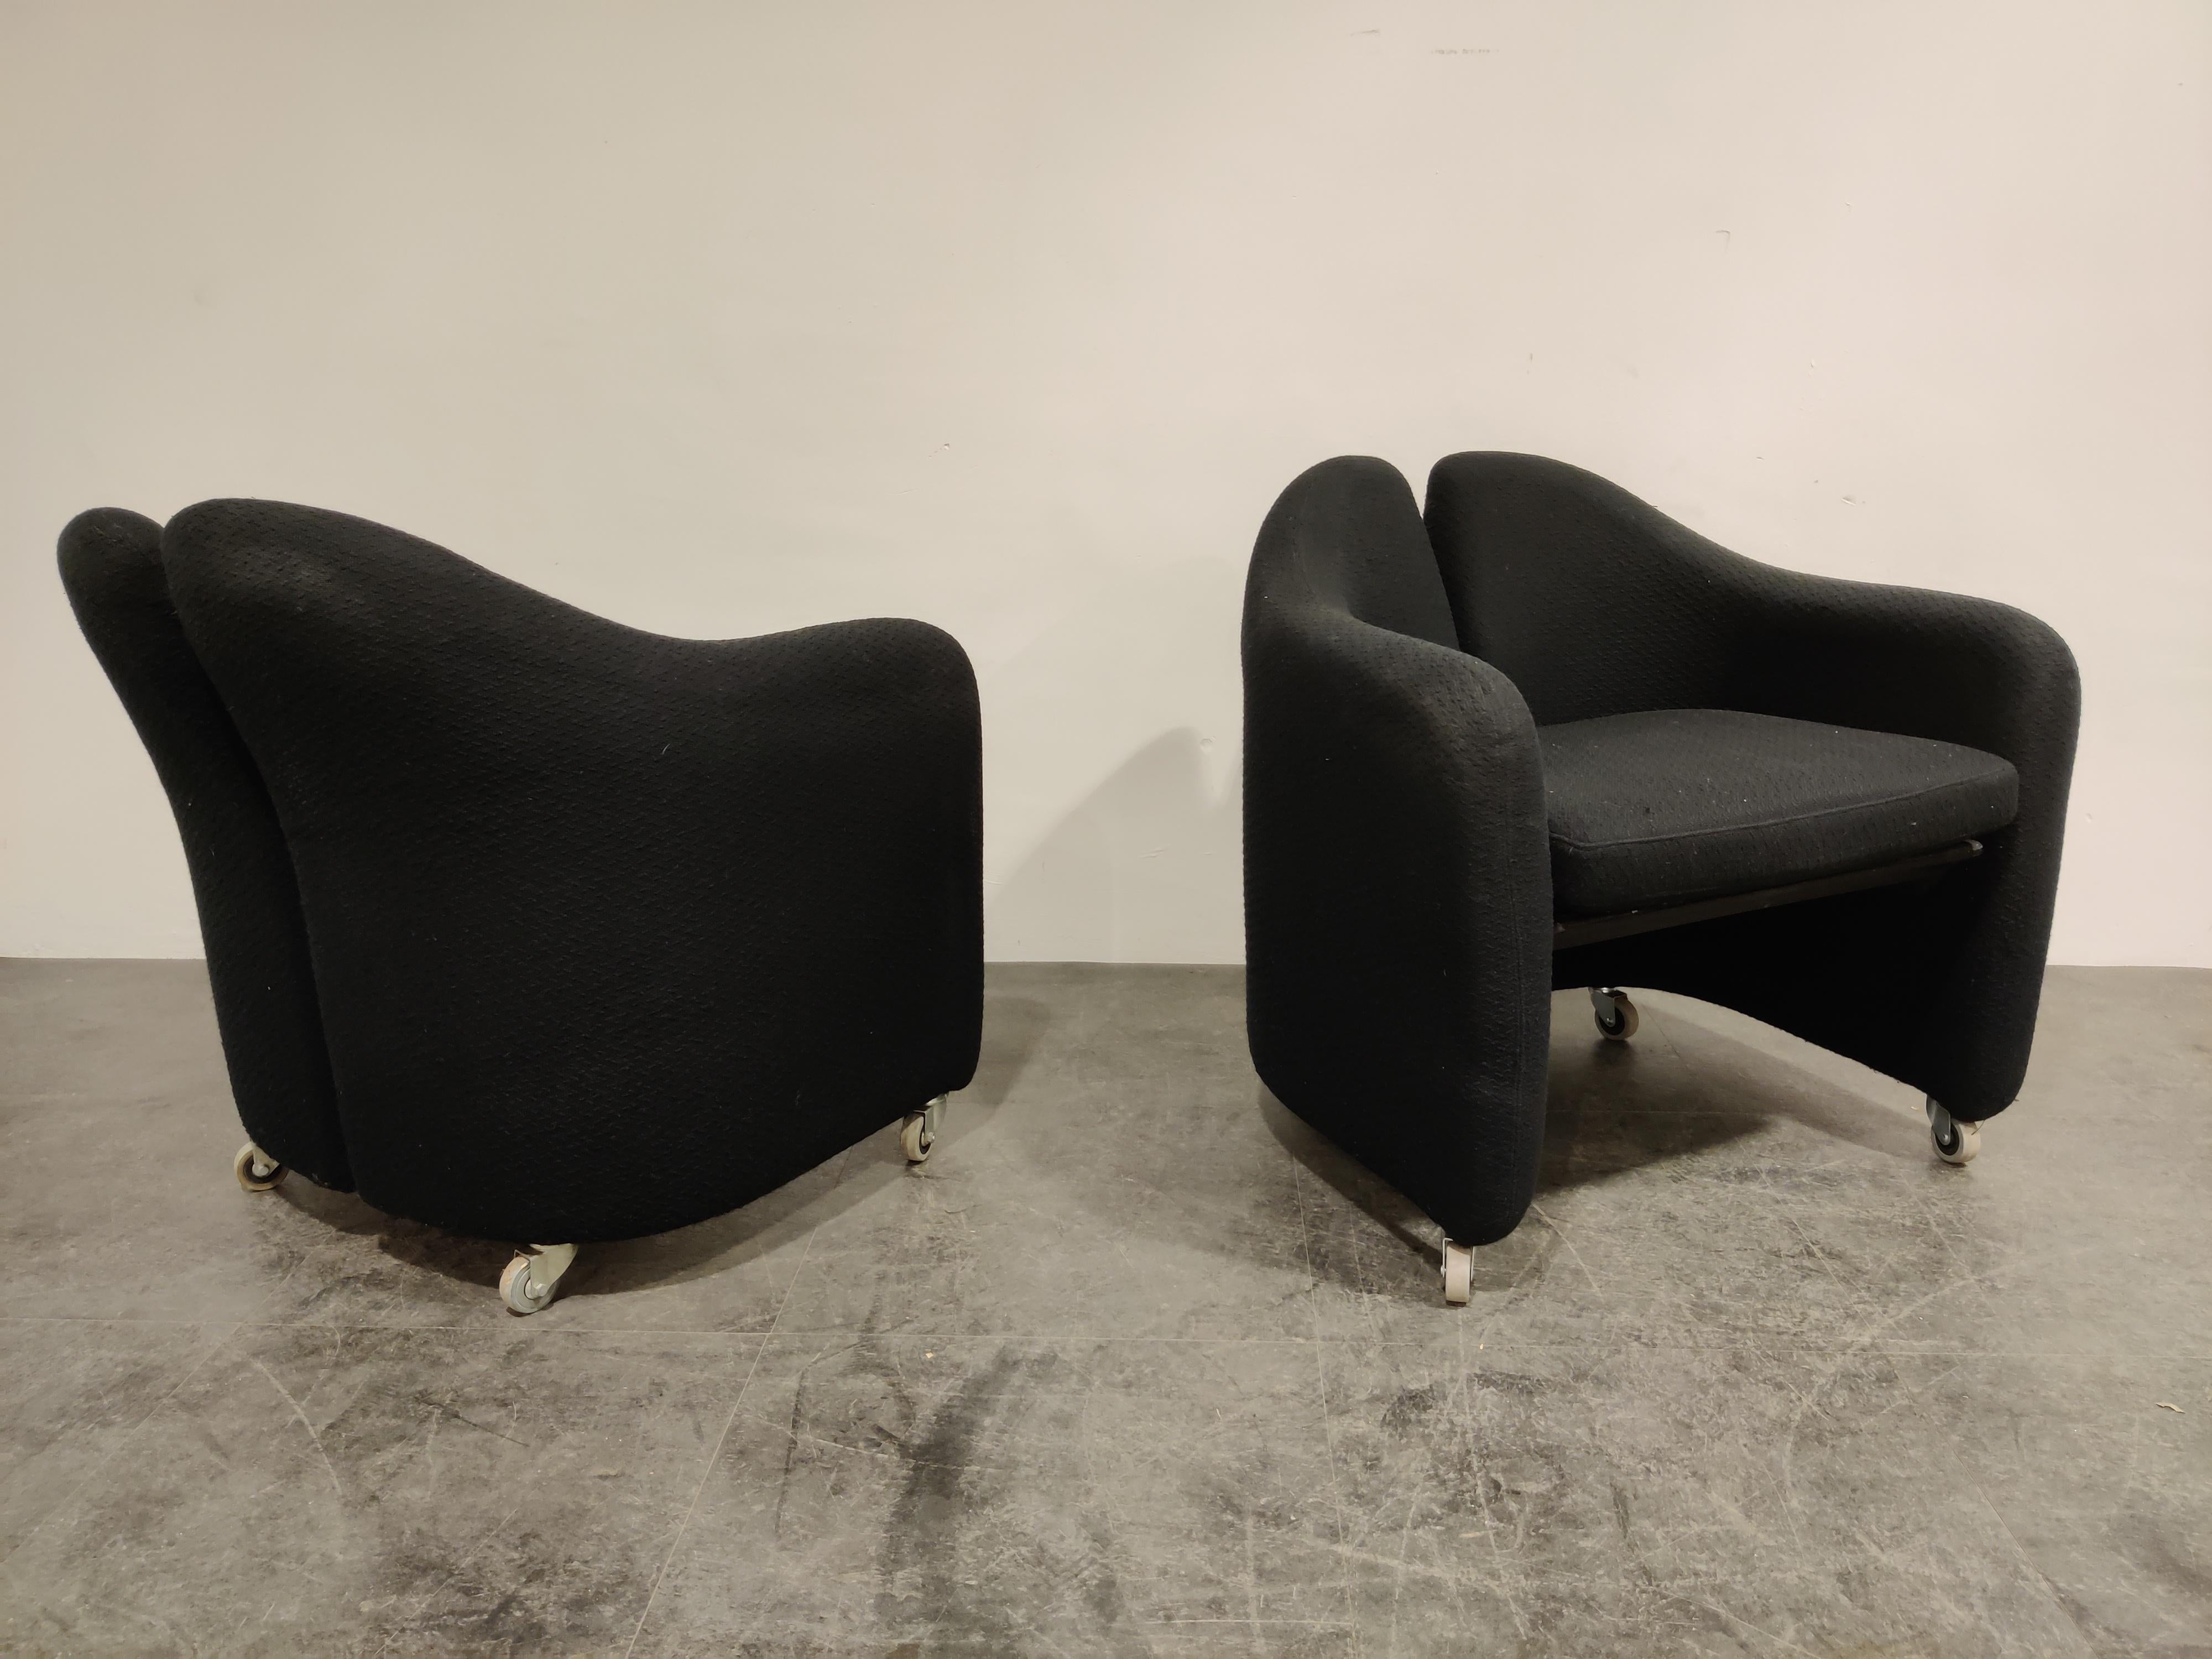 Pair of black fabric armchair designed by Eugenio Gerlio for Tecno, Italy.

These beautiful 'split back' armchairs sit very comfortable.

Good condition, missing a few strings underneath the seat, not influence on seating or